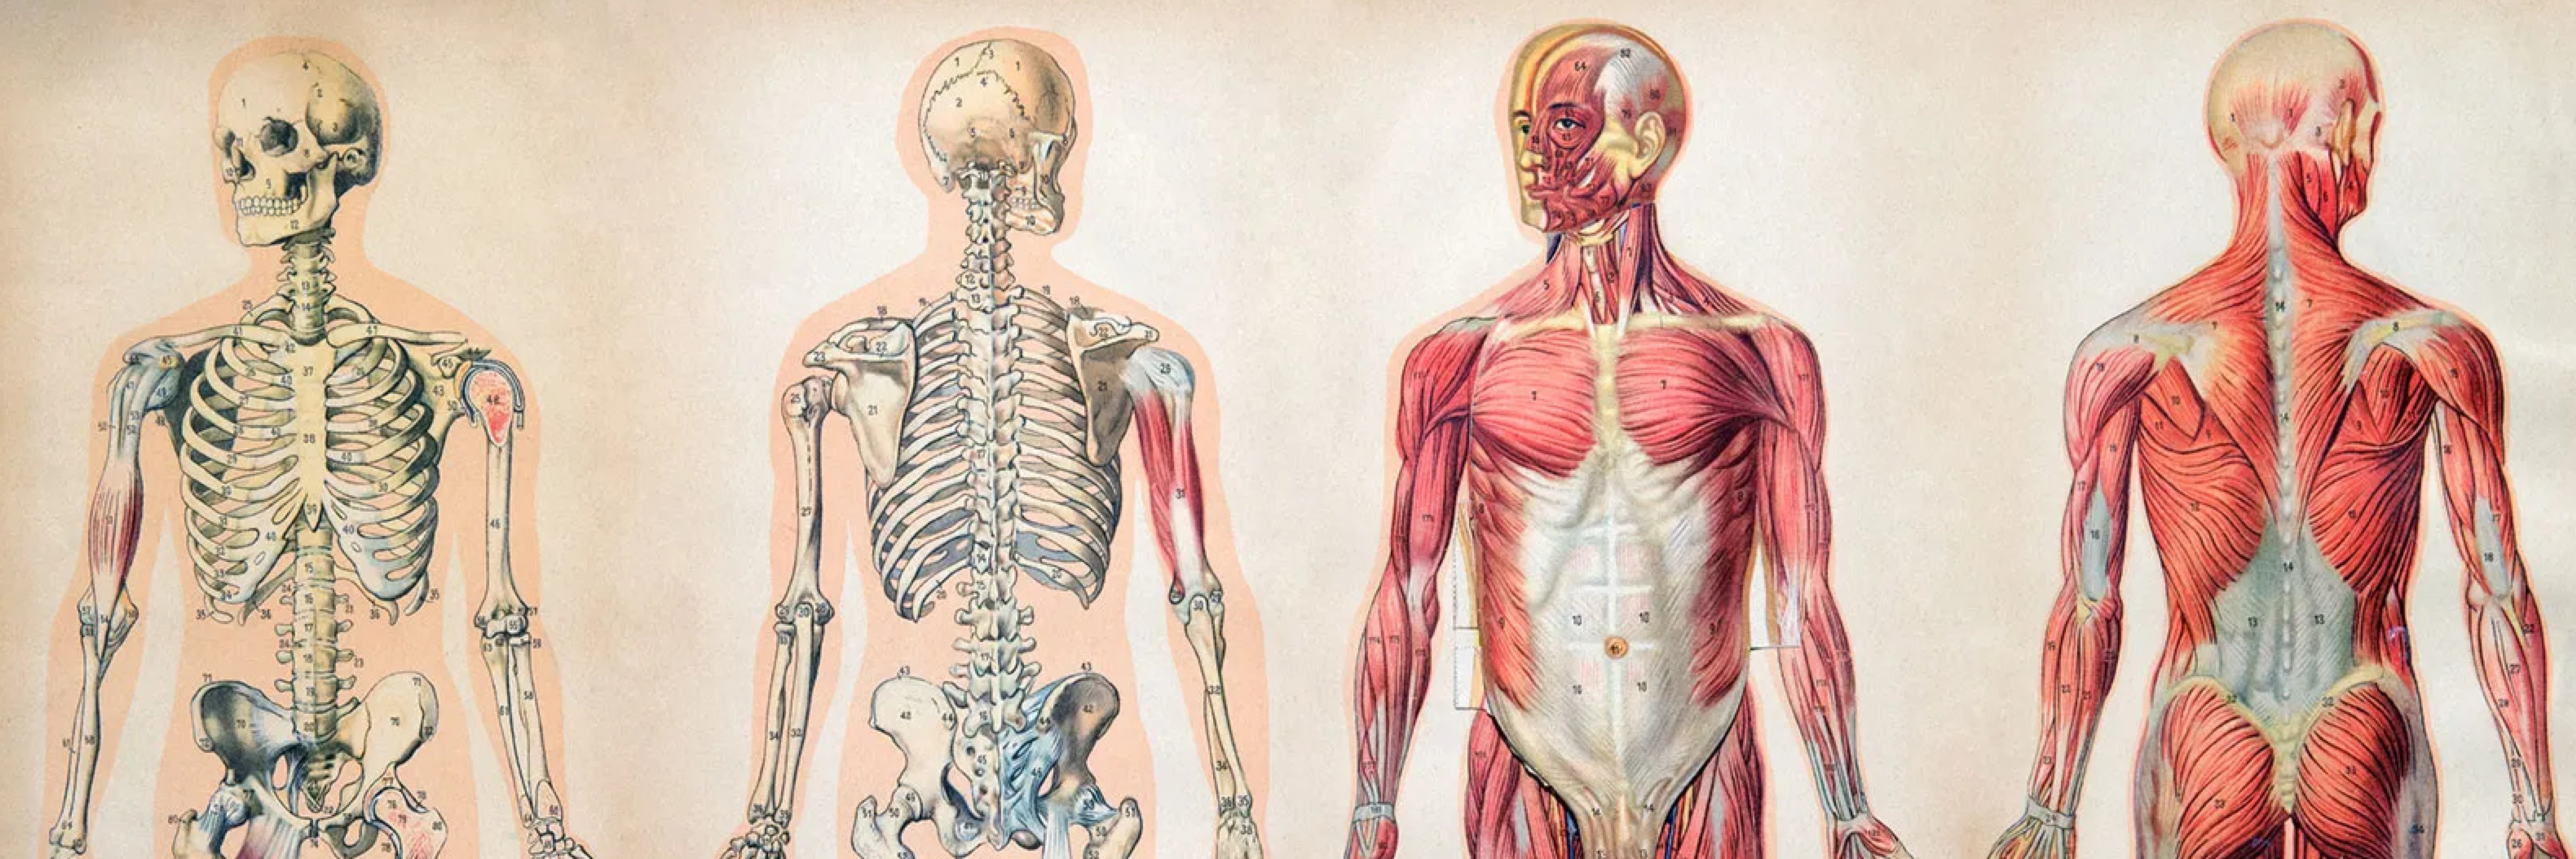 Poster Anatomie du Corps Humain